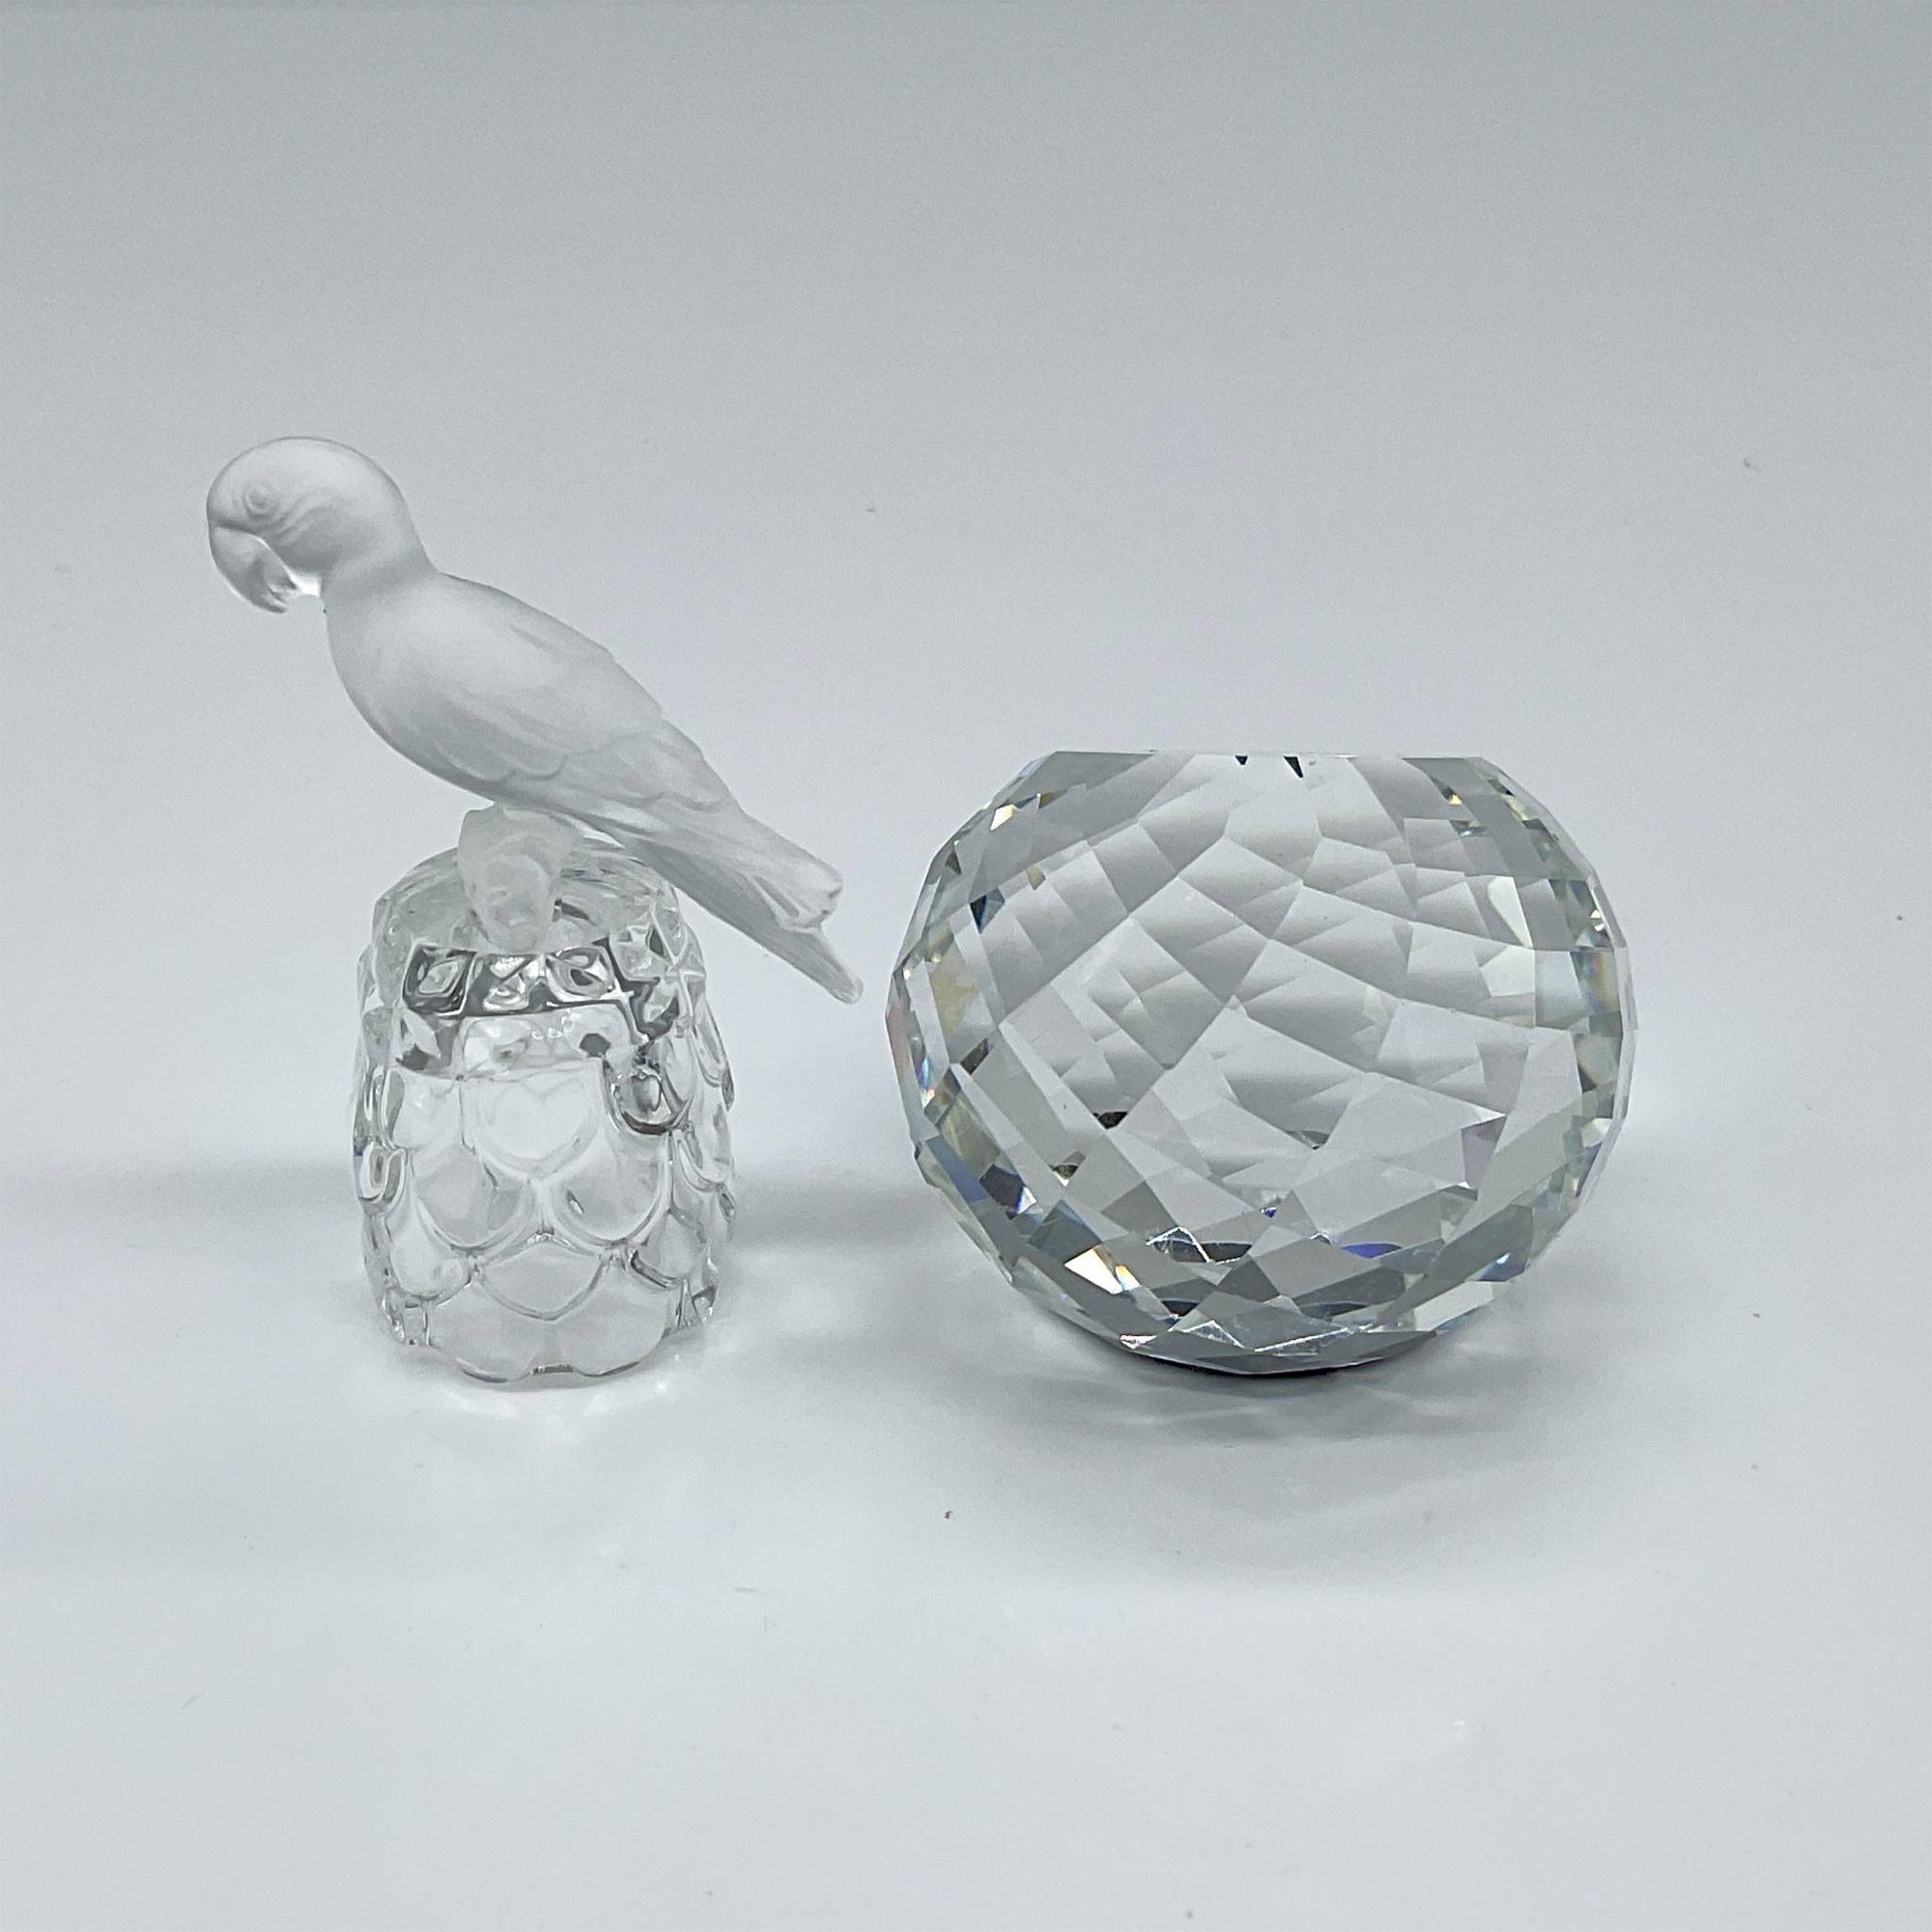 2pc Swarovski Crystal Figurines, Parrot Thimble, Paperweight - Image 2 of 4